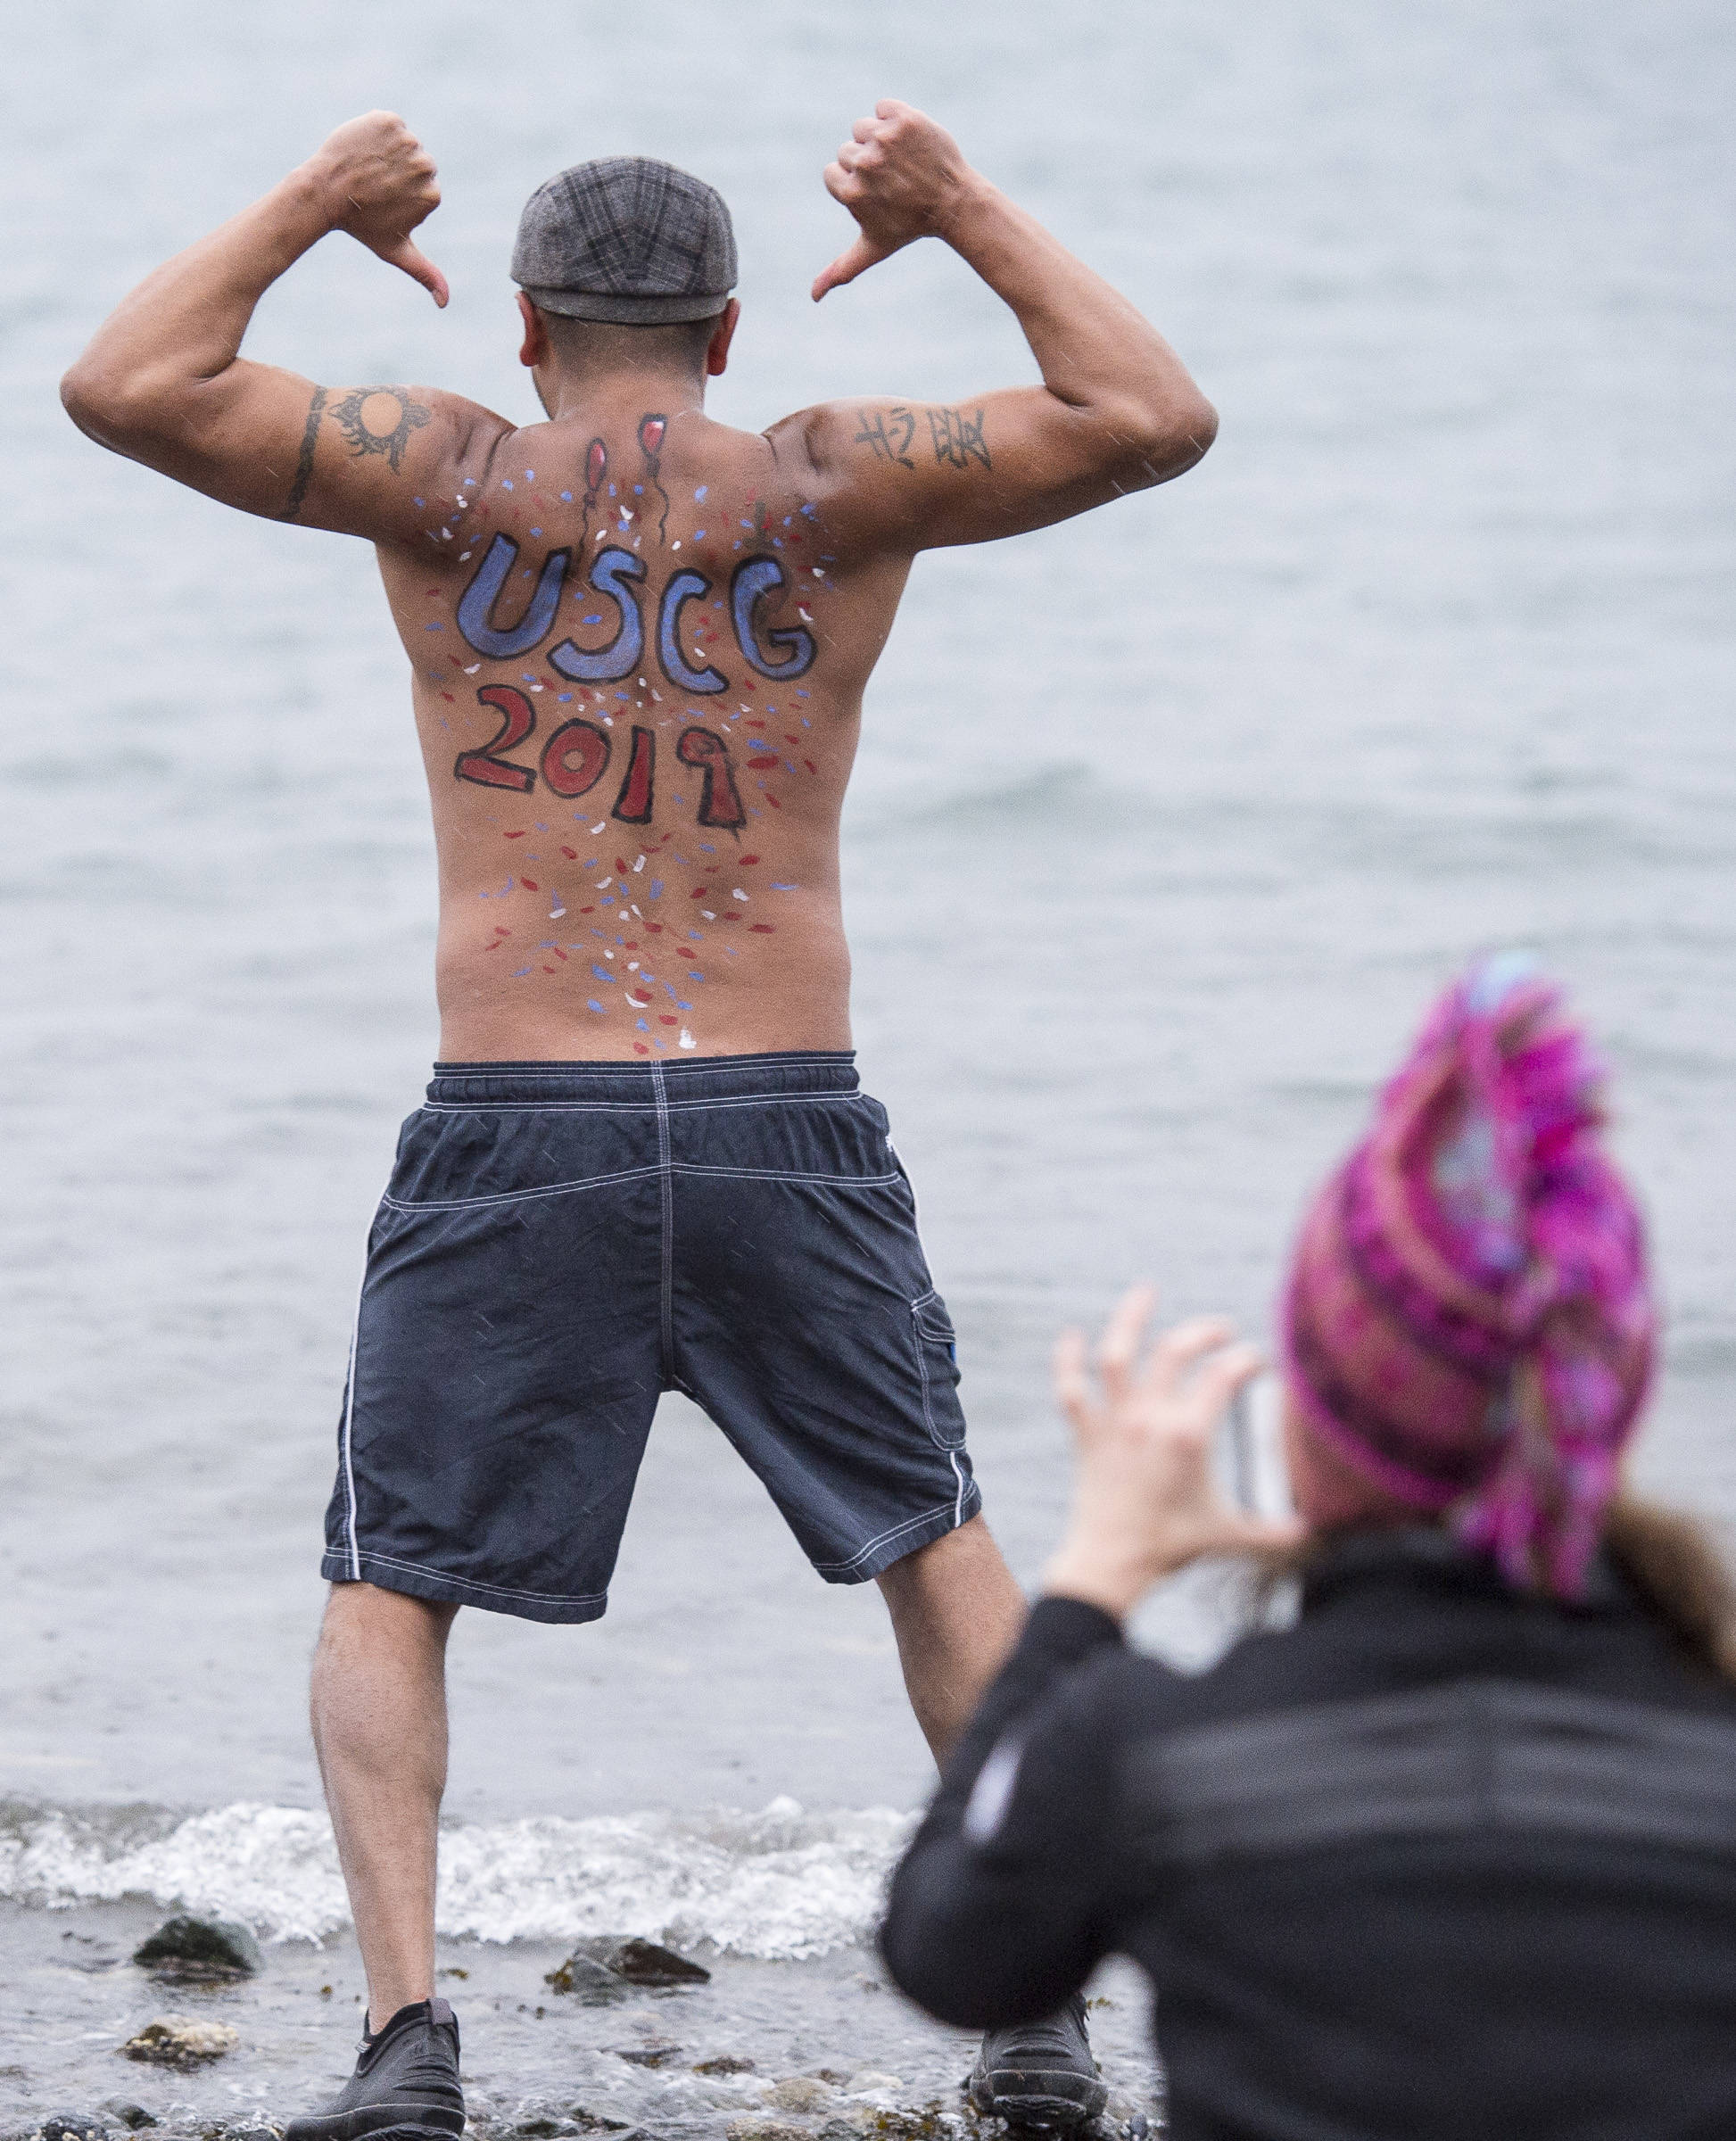 Marvin Pena poses for a picture before taking to the frigid waters at Auke Bay Recreation Area for the annual Juneau Polar Bear Dip on Tuesday, Jan. 1, 2019. Nearly 200 people took the plunge to start off the new year. (Michael Penn | Juneau Empire)